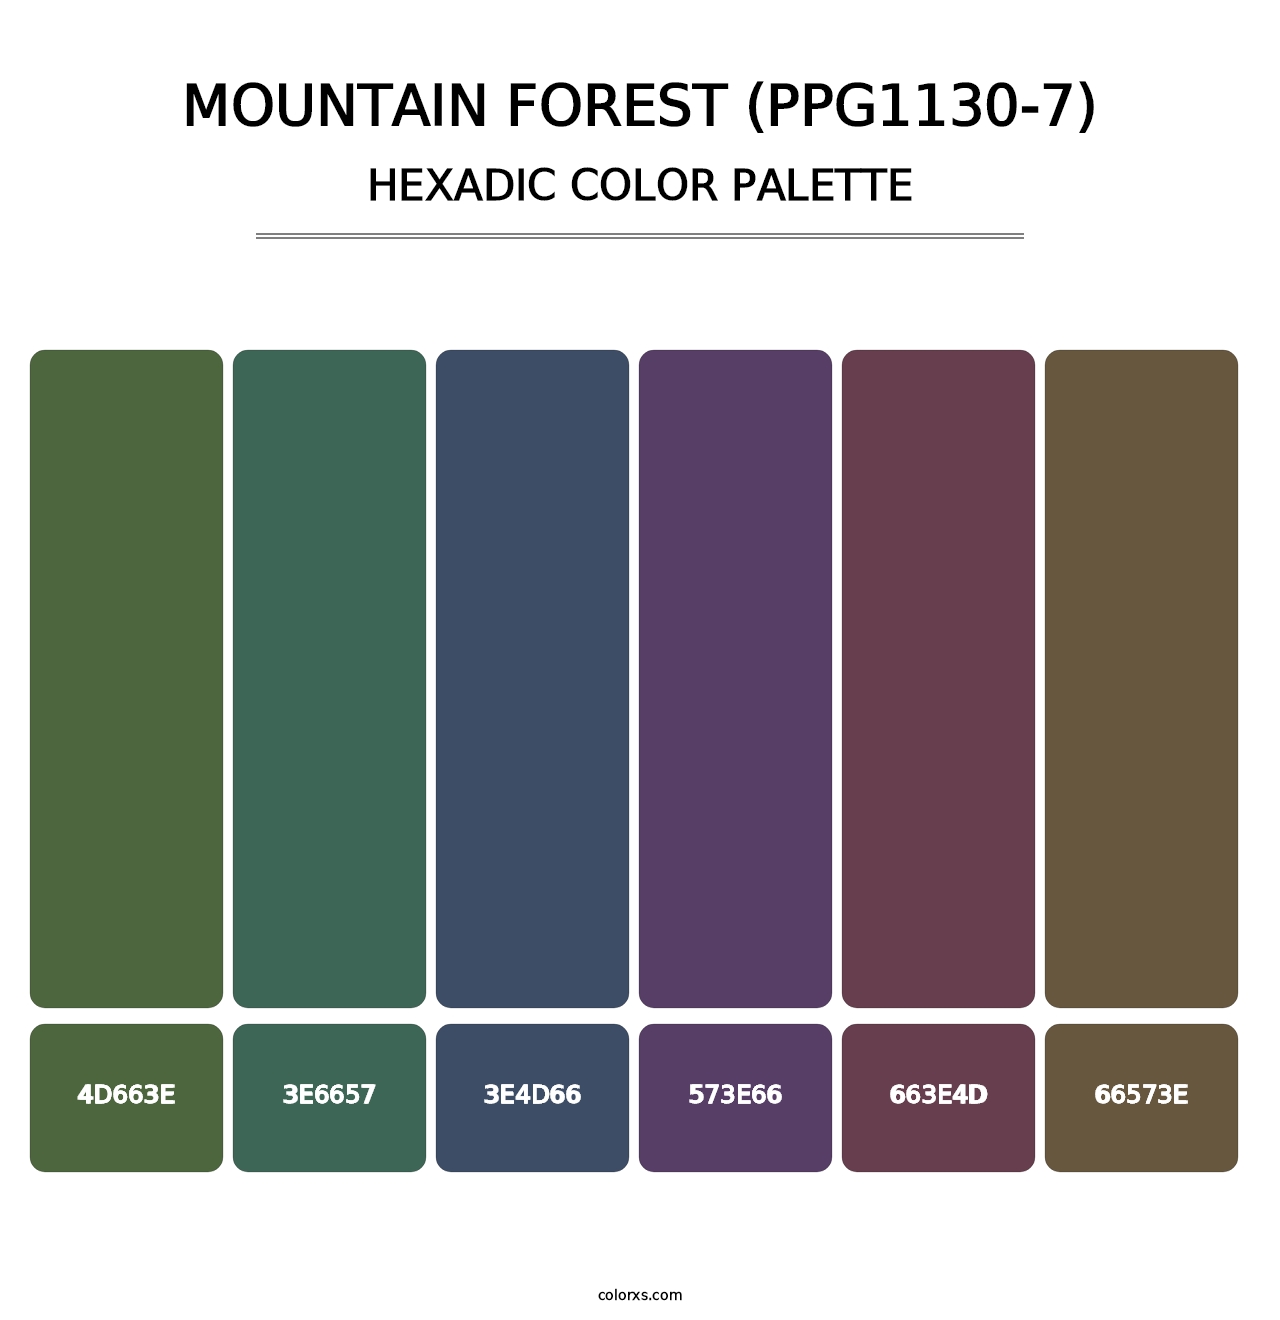 Mountain Forest (PPG1130-7) - Hexadic Color Palette